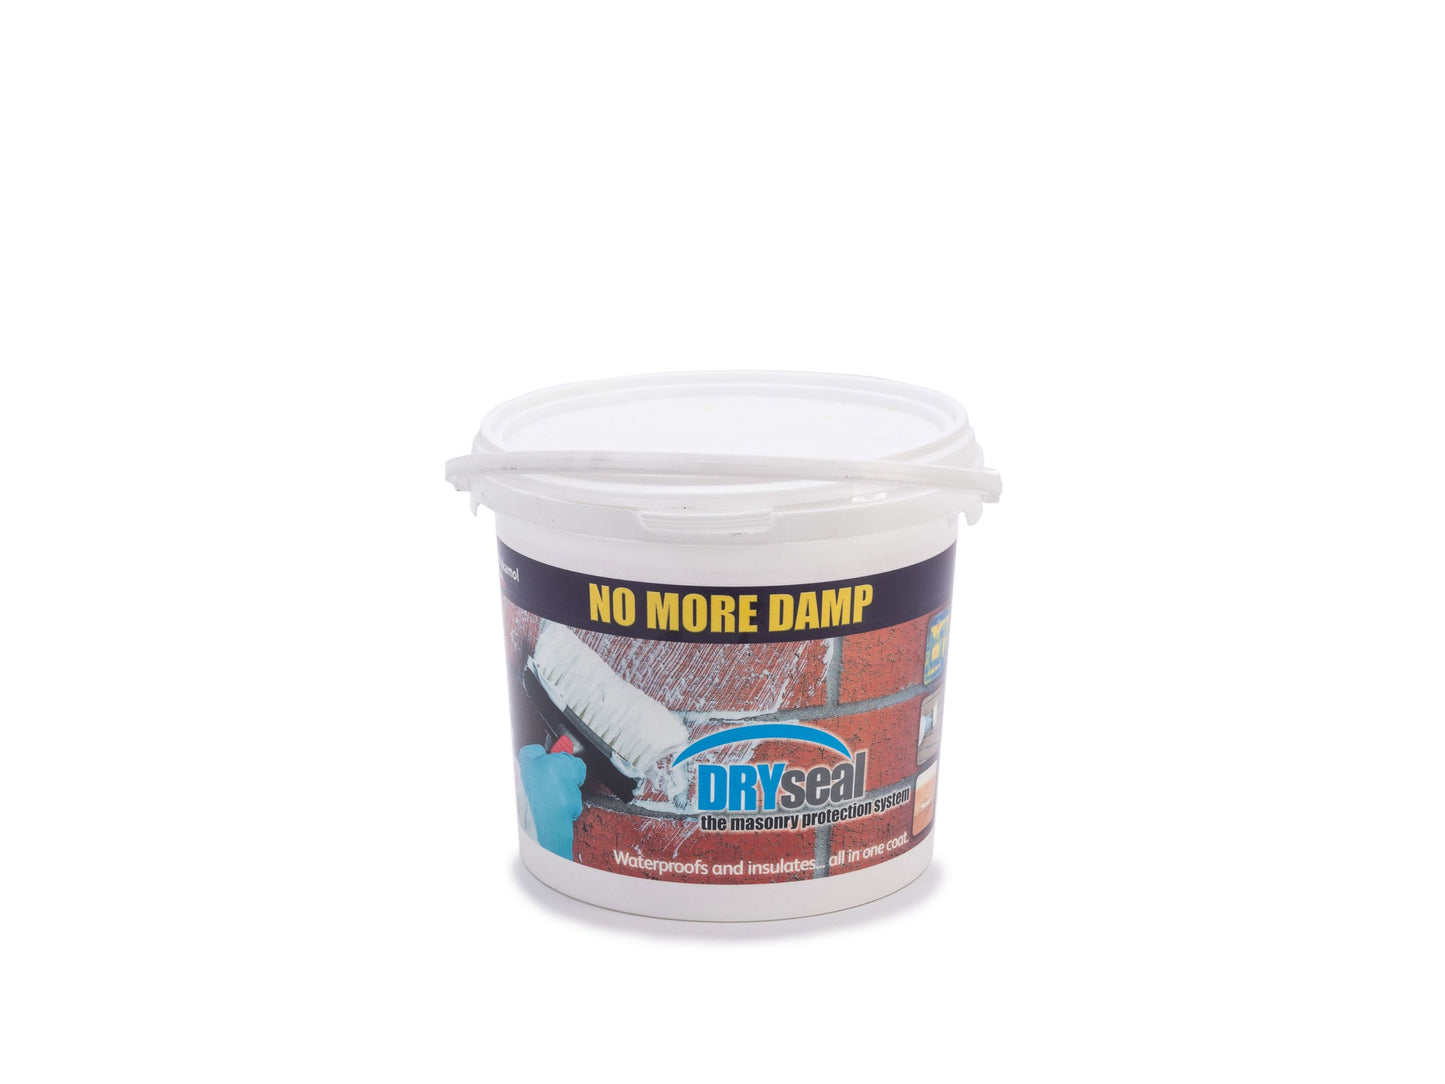 No More Damp Dryseal high strength water repellent cream for brick and stone facades